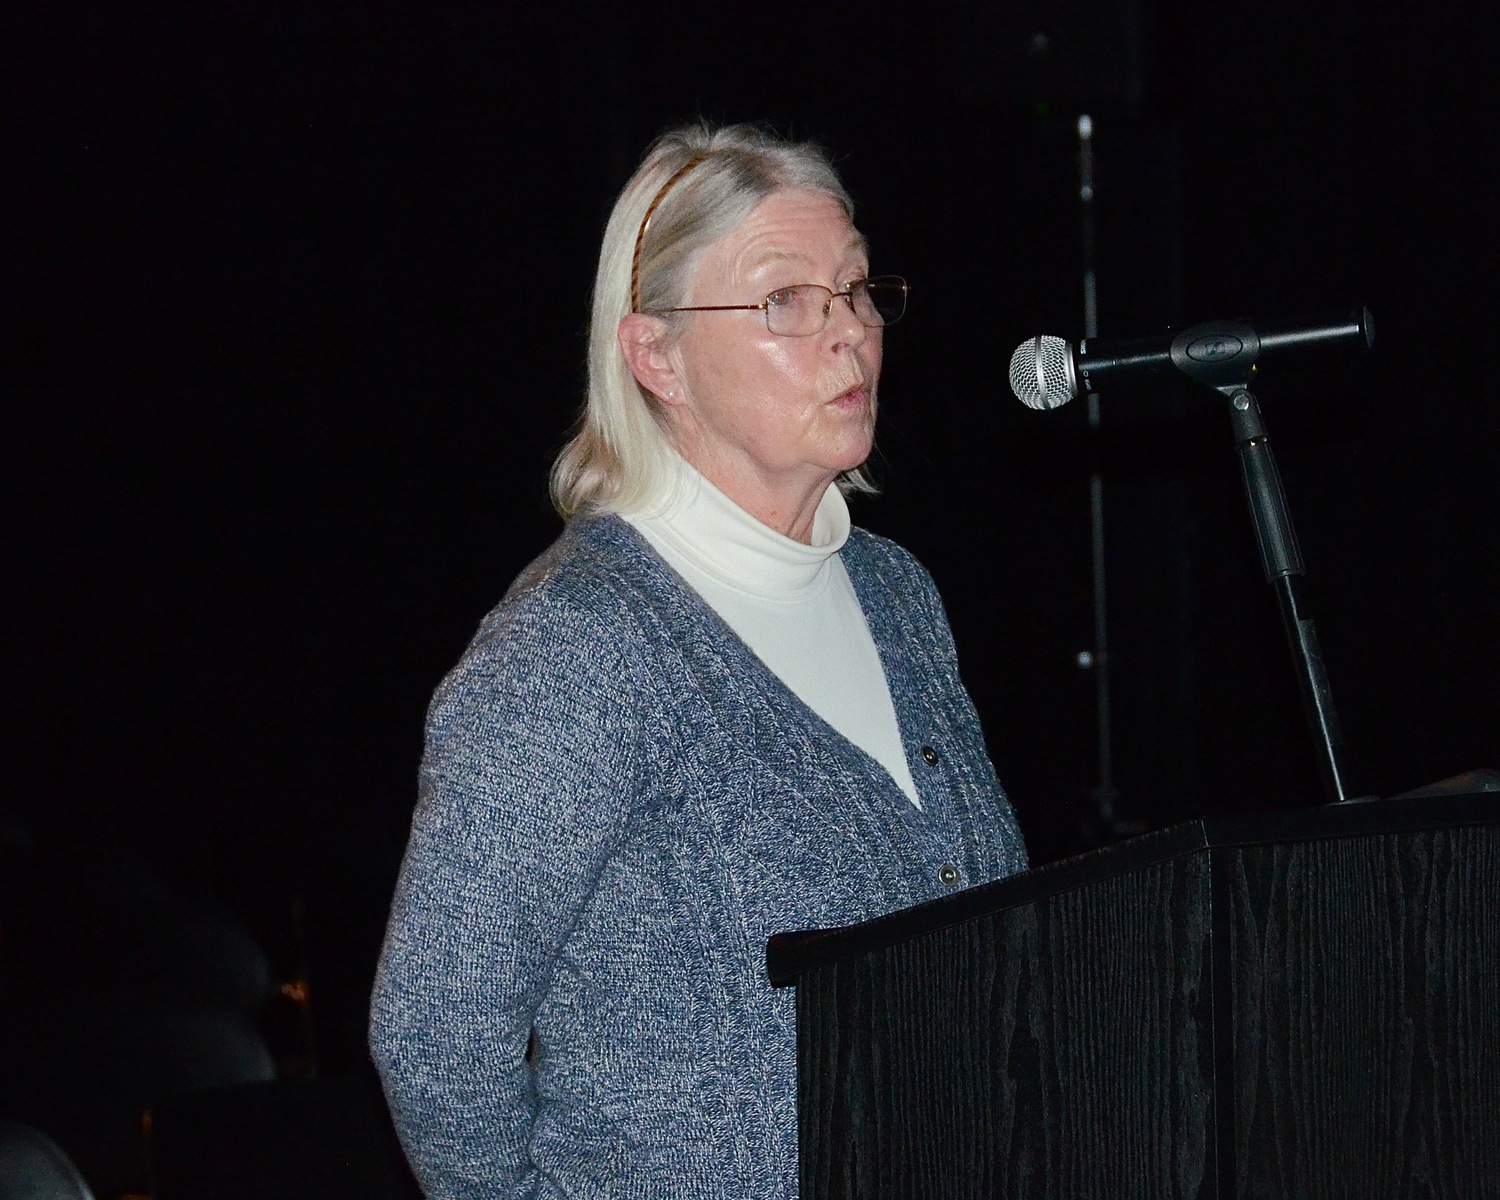 Mary Mott is the chief of the East Hampton Village Volunteer Ambulance, and one of the petitioners asking a court to dissolve the East Hampton Village Ambulance Assocaition. KYRIL BROMLEY